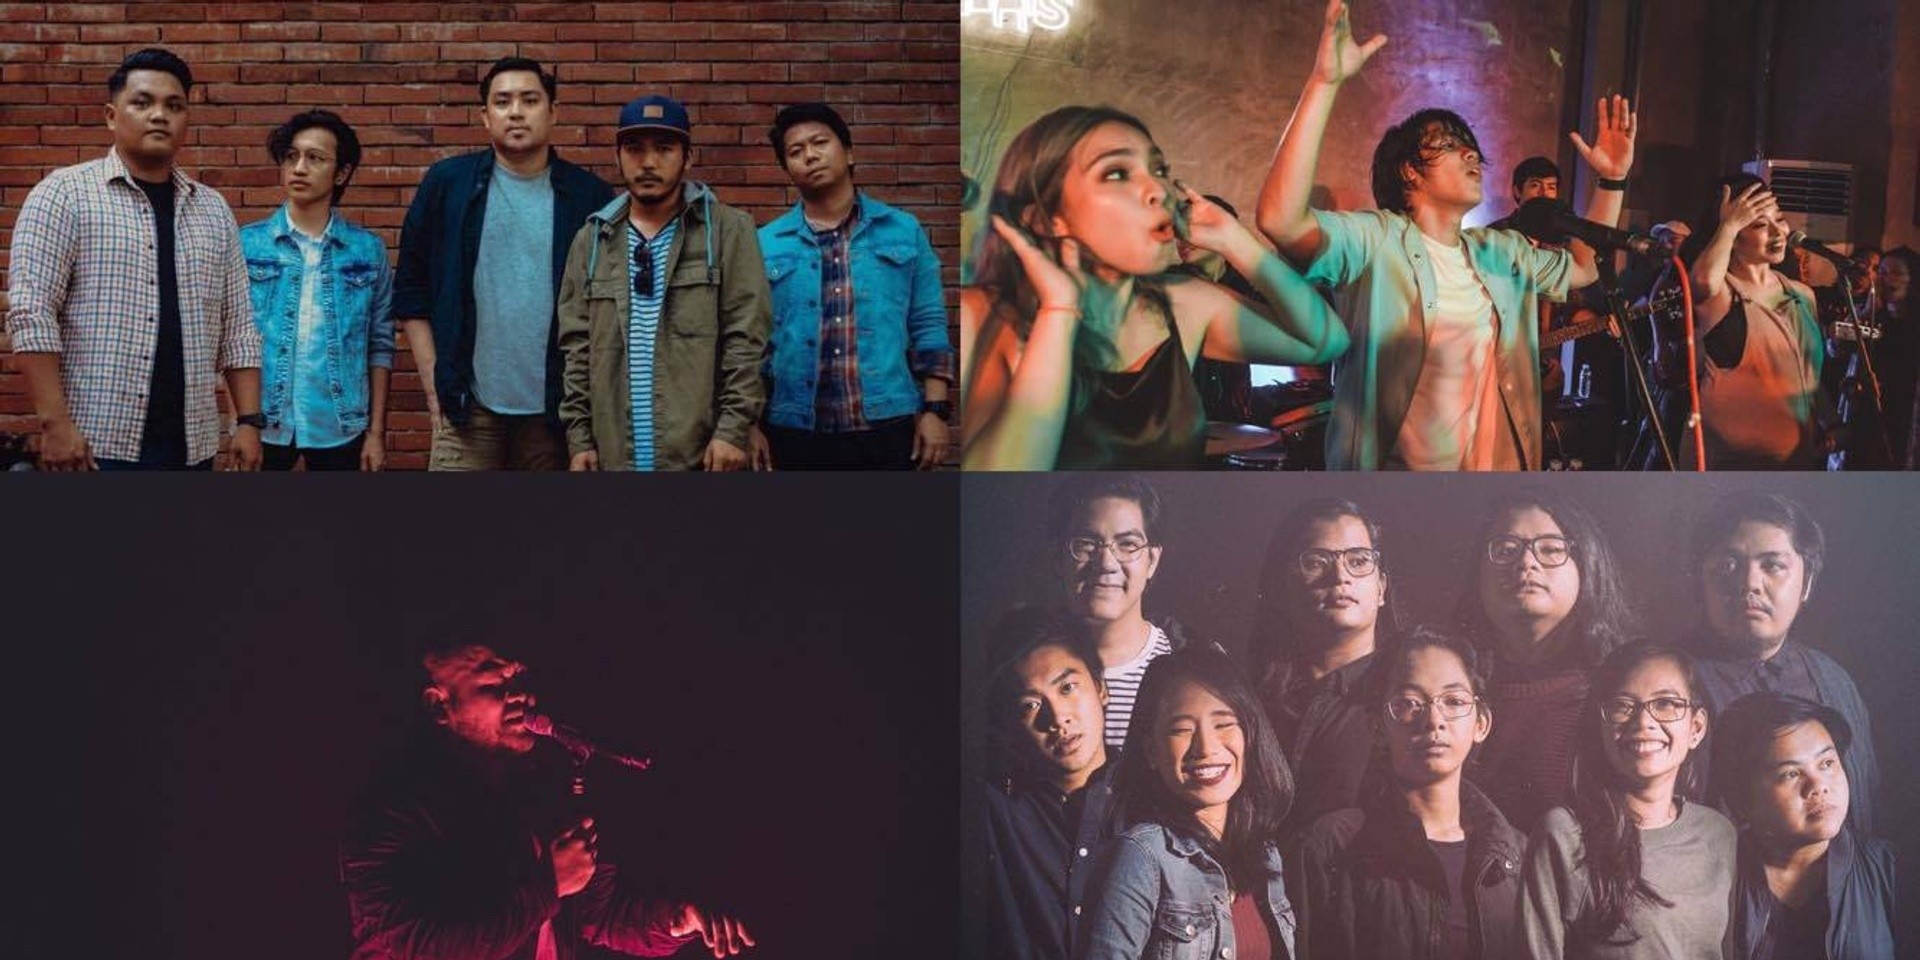 Watch Ben&Ben, Cheats, December Avenue, and more perform with iPads and iPhones